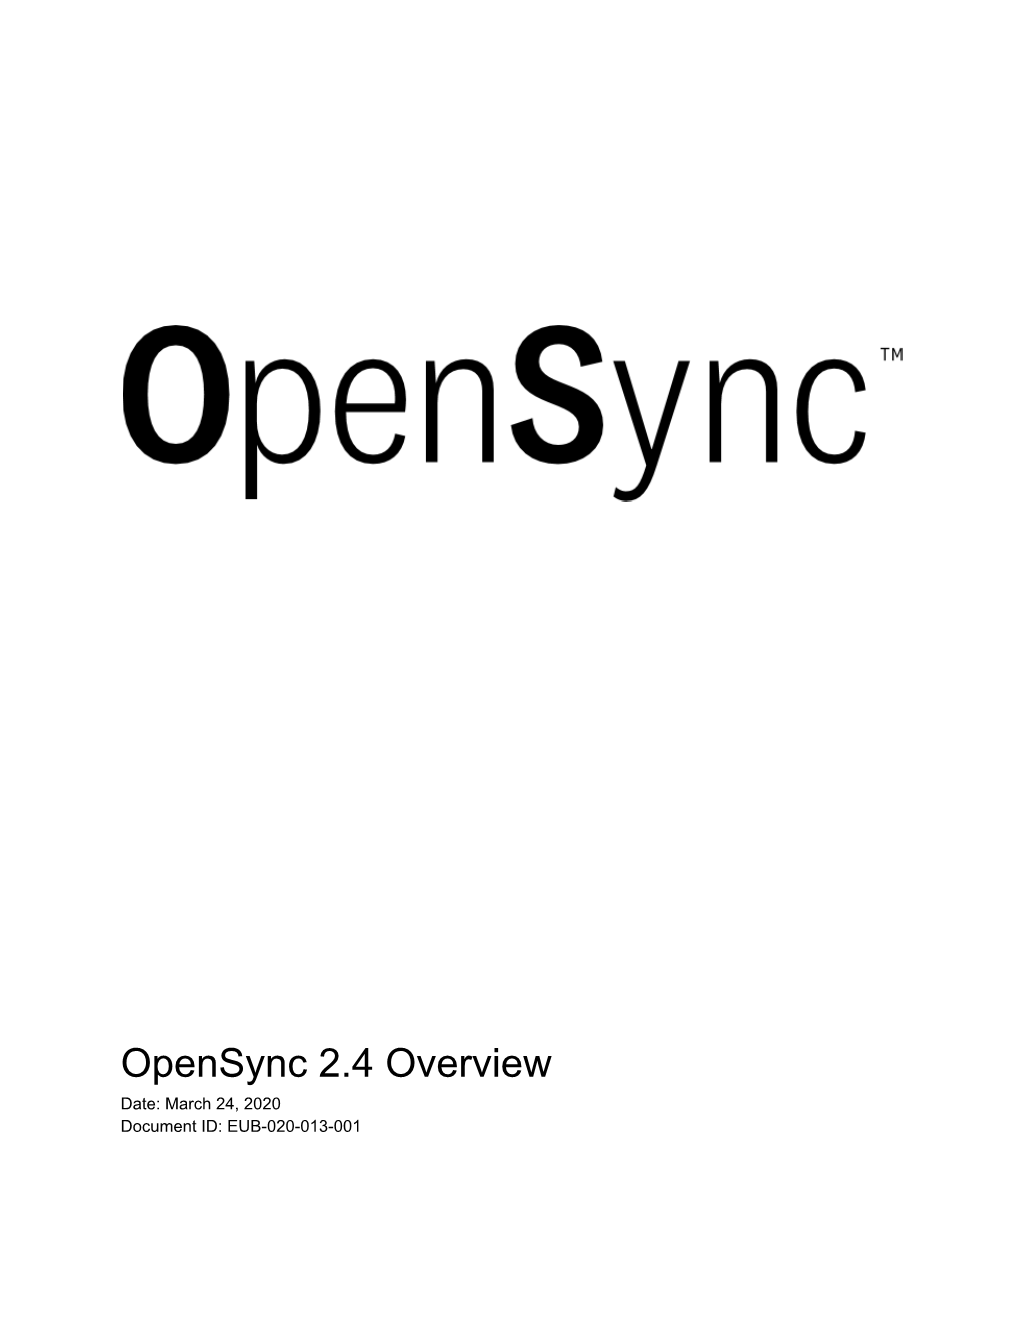 Opensync 2.4 Overview Date: March 24, 2020 Document ID: EUB-020-013-001 Table of Contents